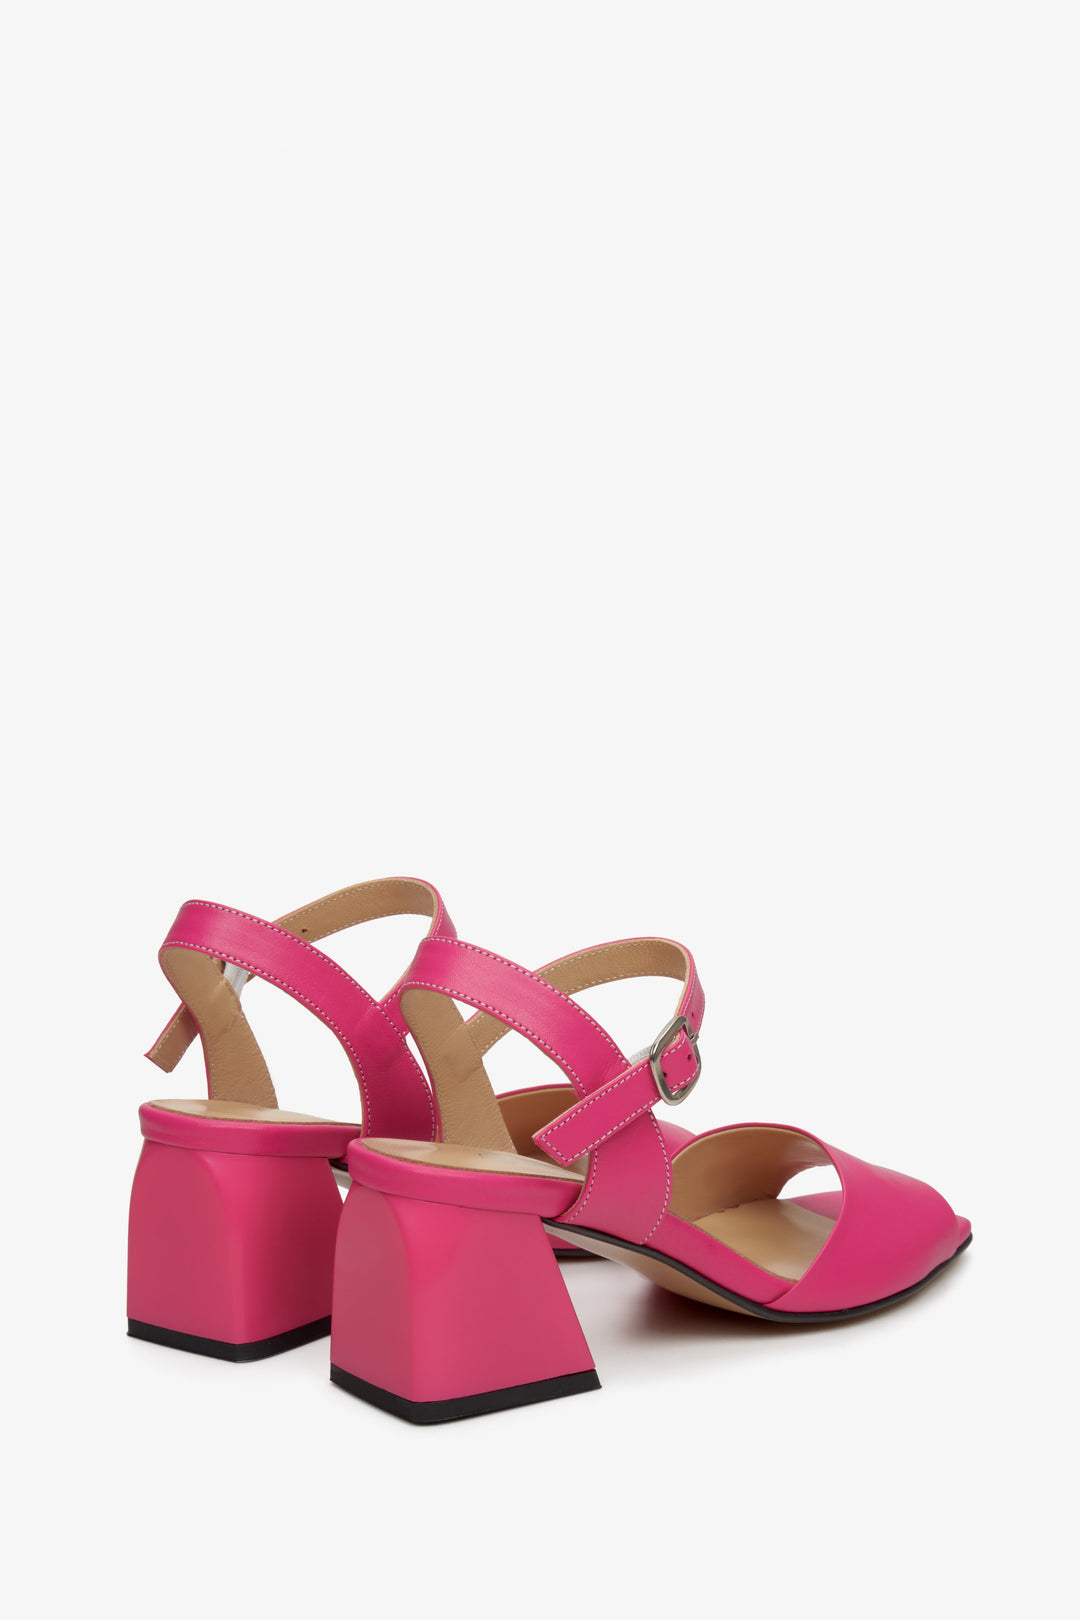 Women's pink leather sandals by Estro - close-up on the block heel and side profile of the shoes.